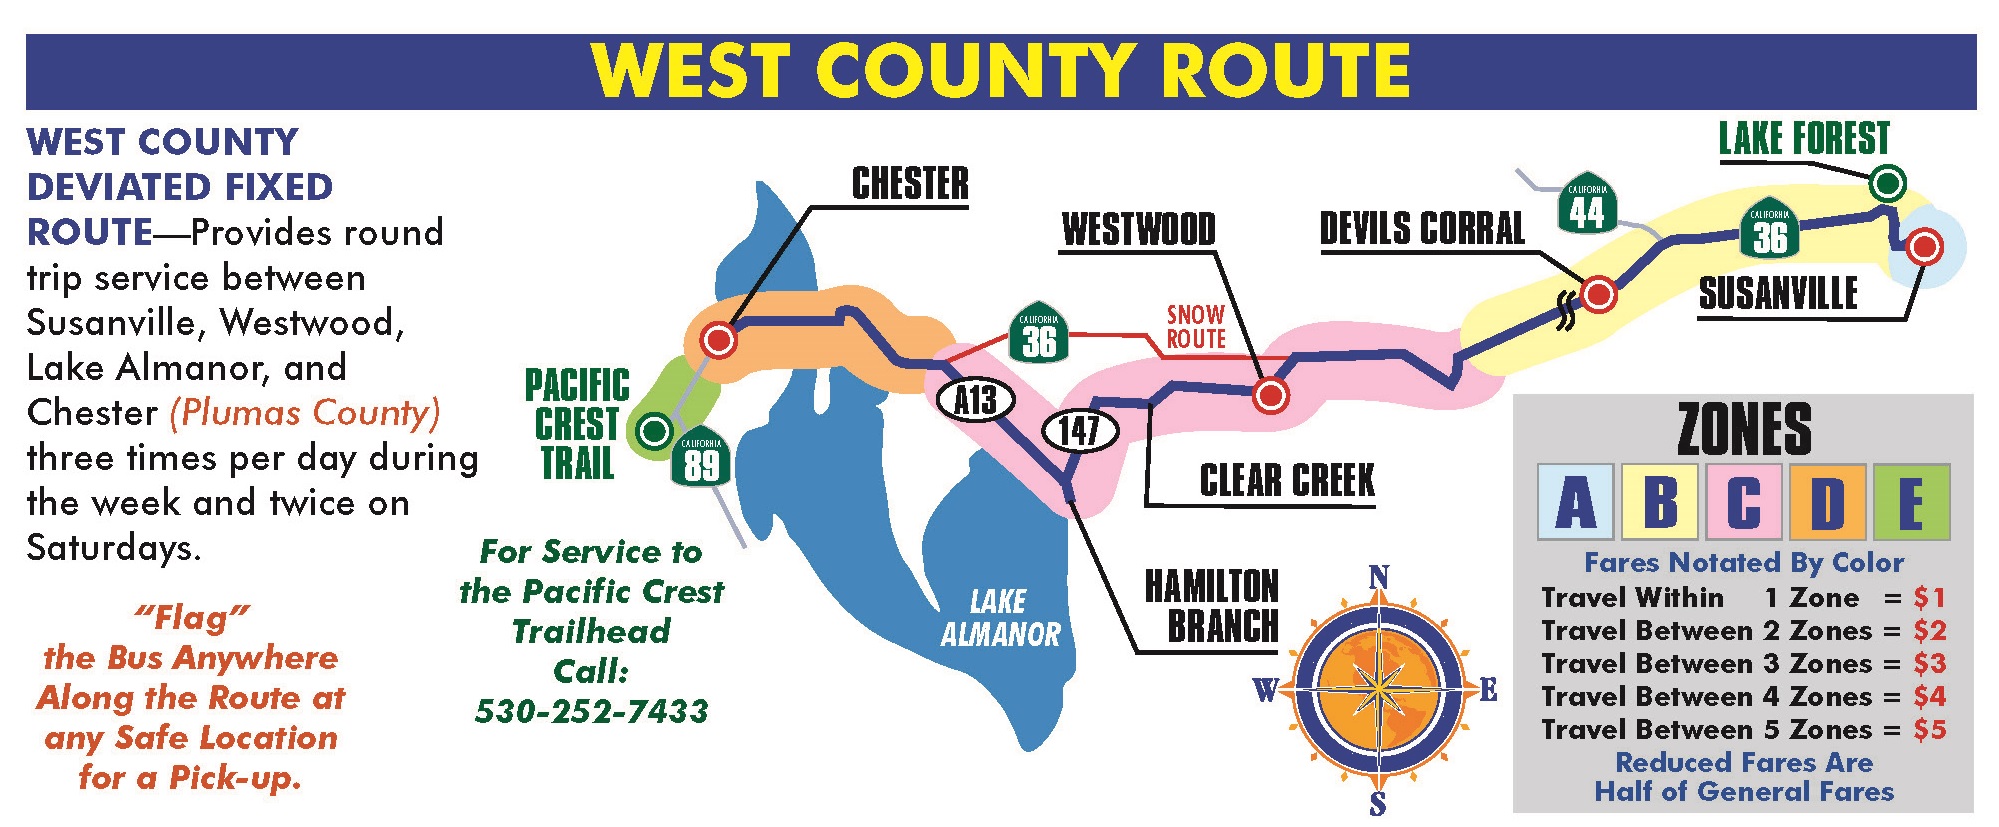 West County Route